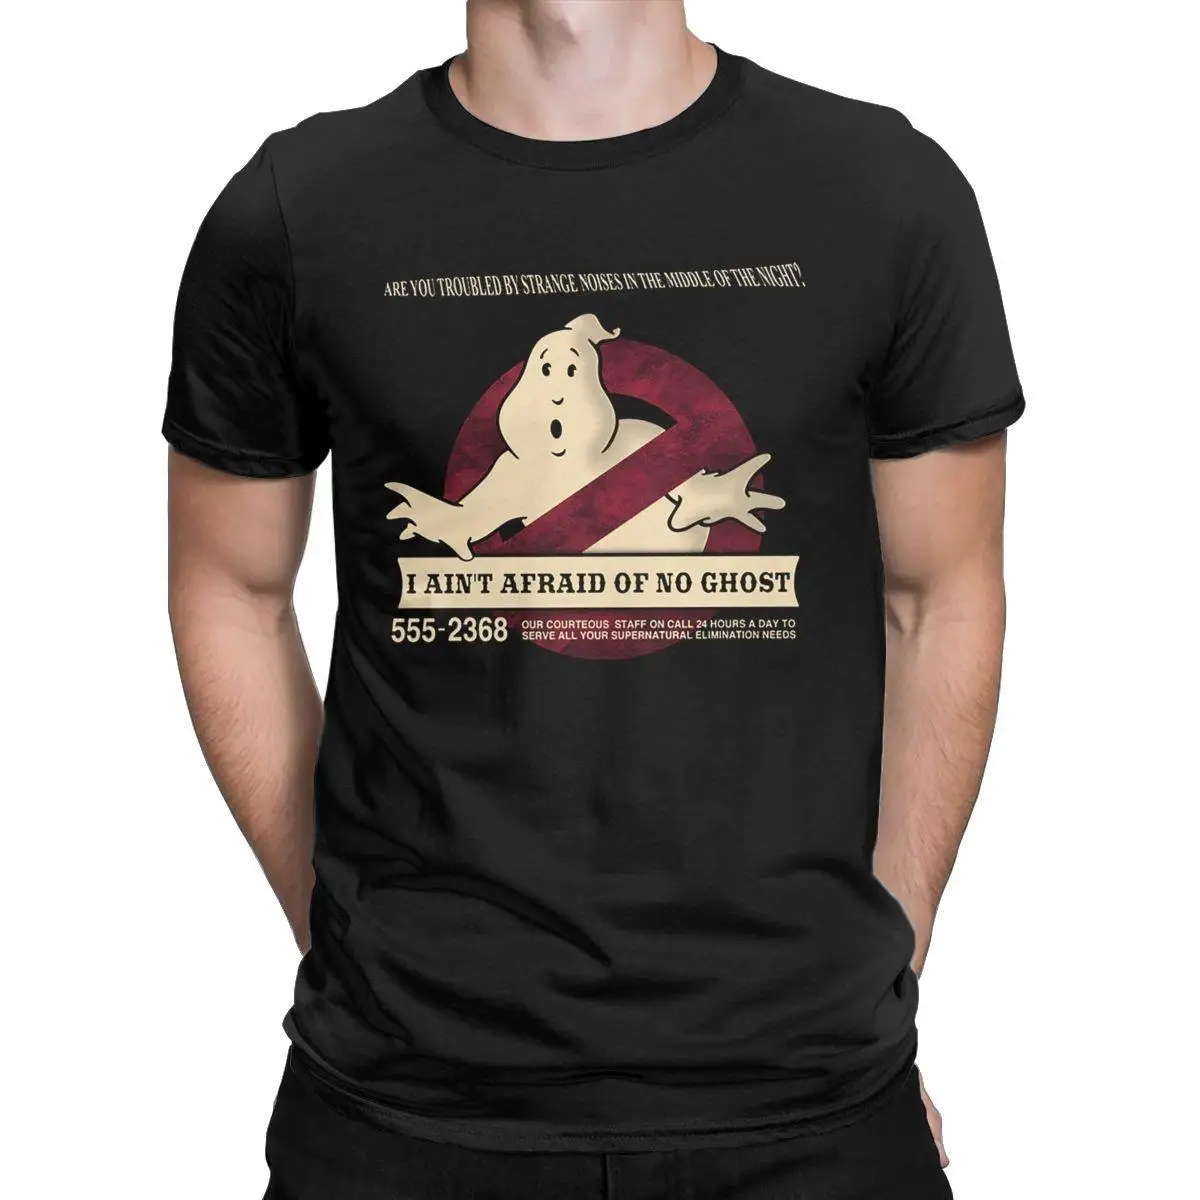 Men's T-Shirt I Ain't Afraid Of No Ghost Funny Pure Cotton Tee Shirt Short Sleeve T Shirts Round Collar Clothes Printed